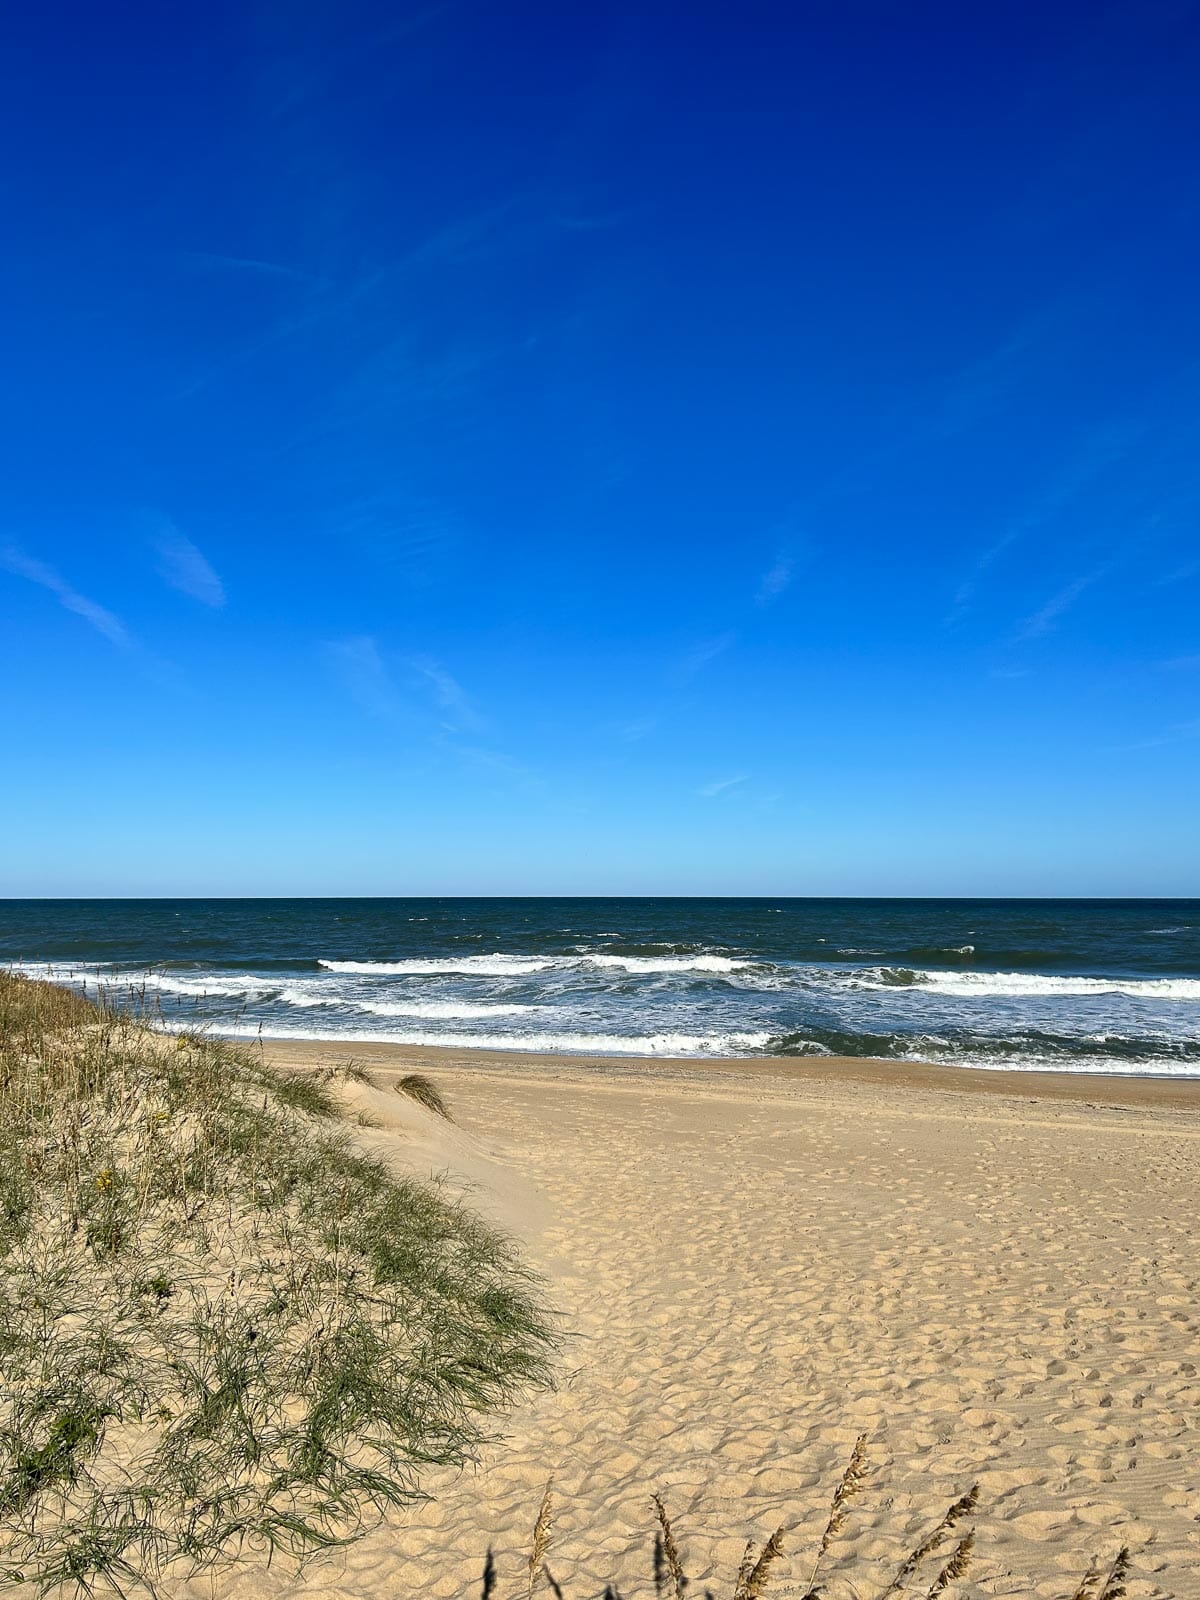 Beach and sand dunes at Kill Devil Hills, NC in the Outer Banks.